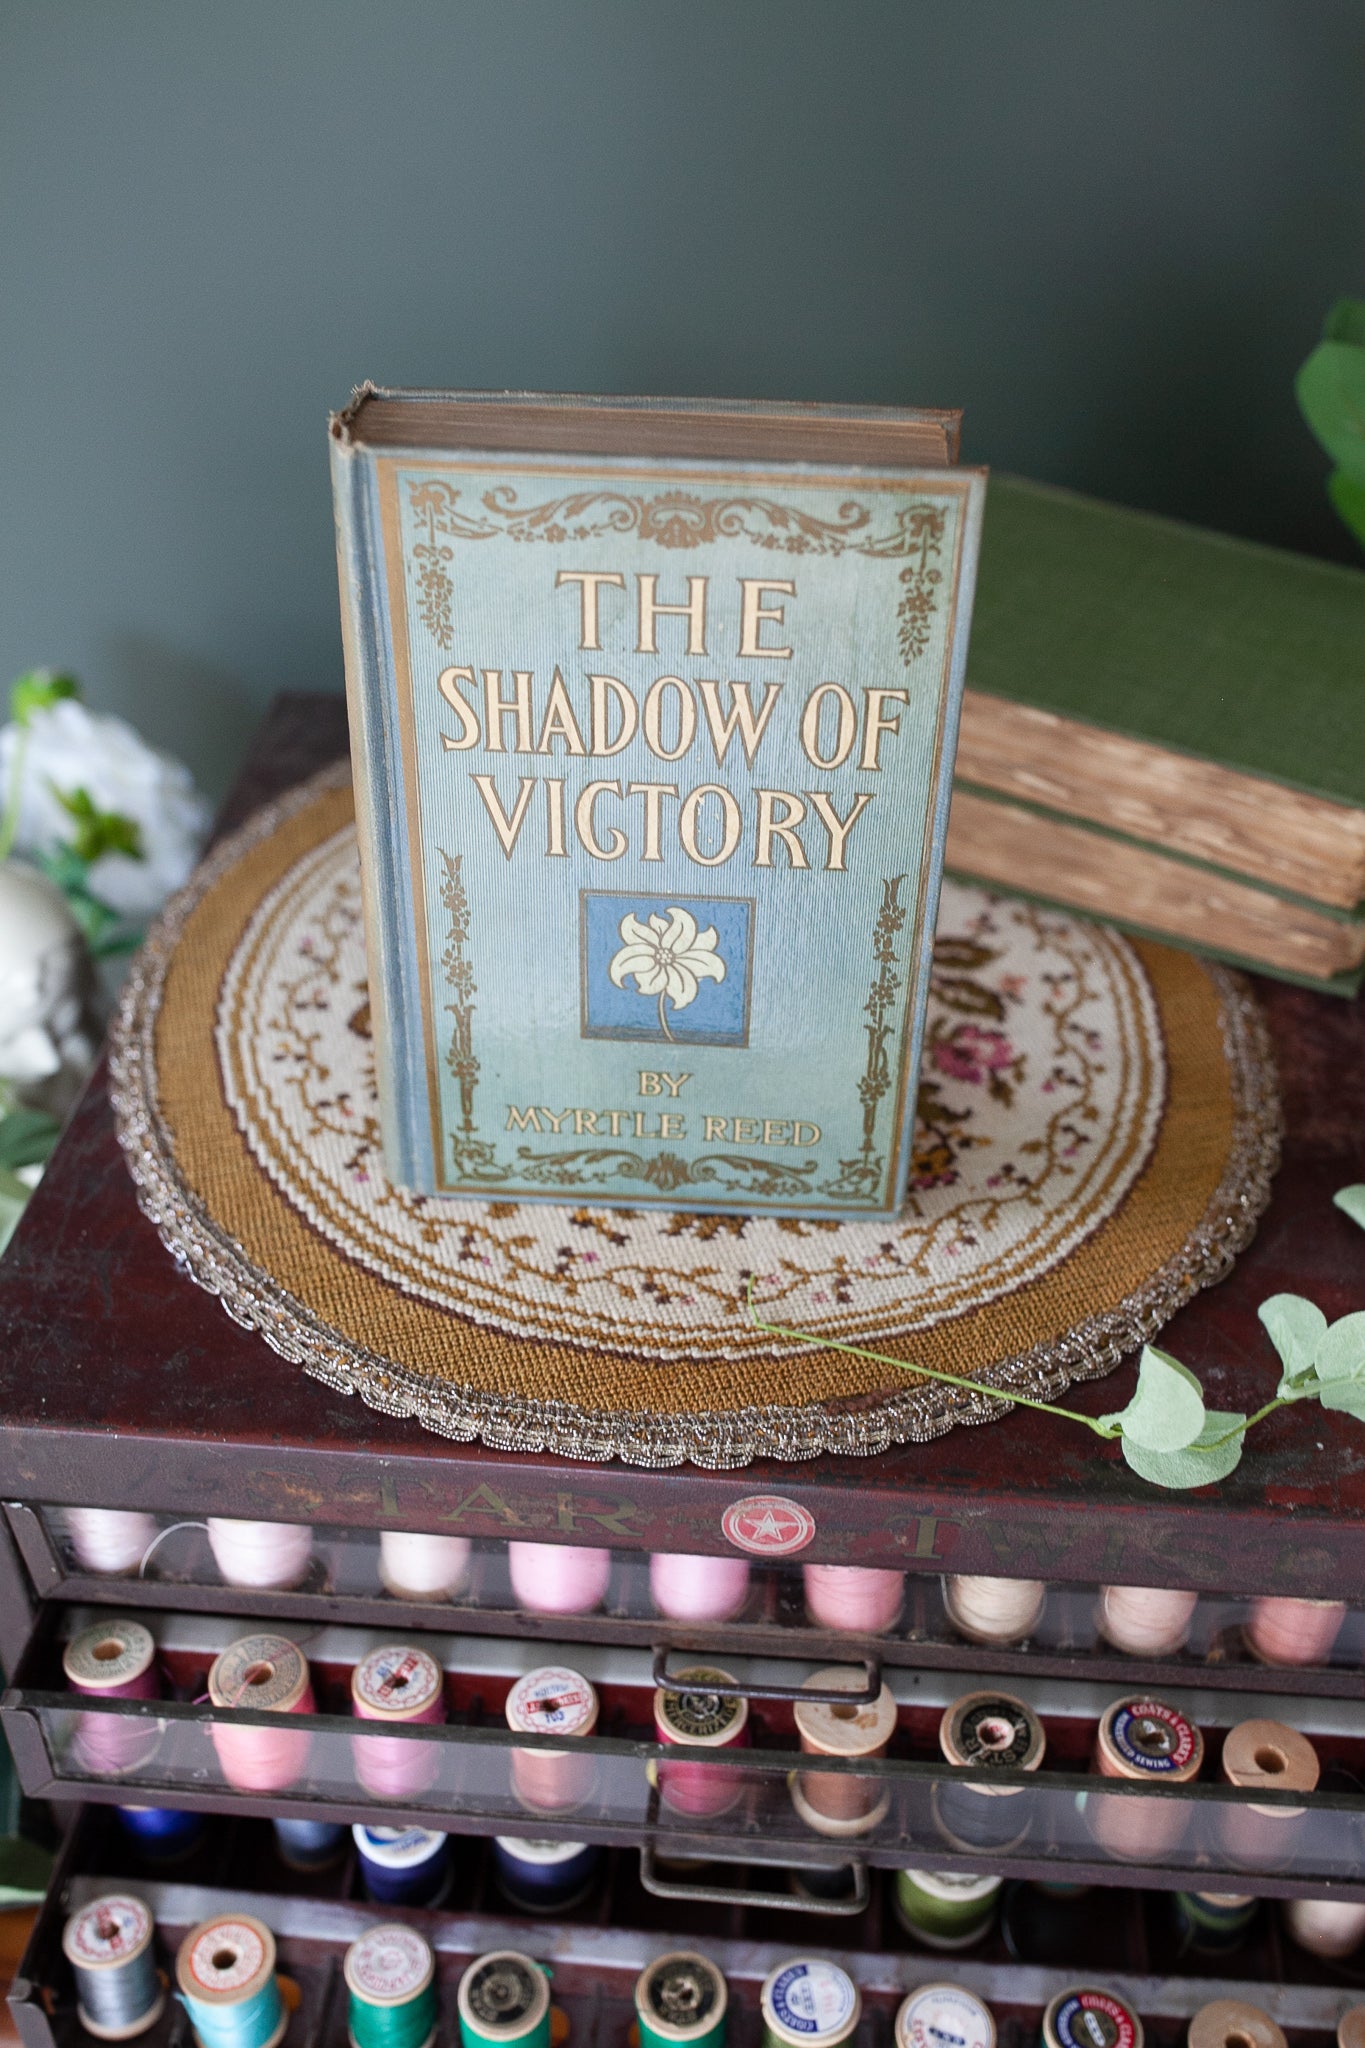 Vintage Book - The Shadow of Victory  by Myrtle Reed